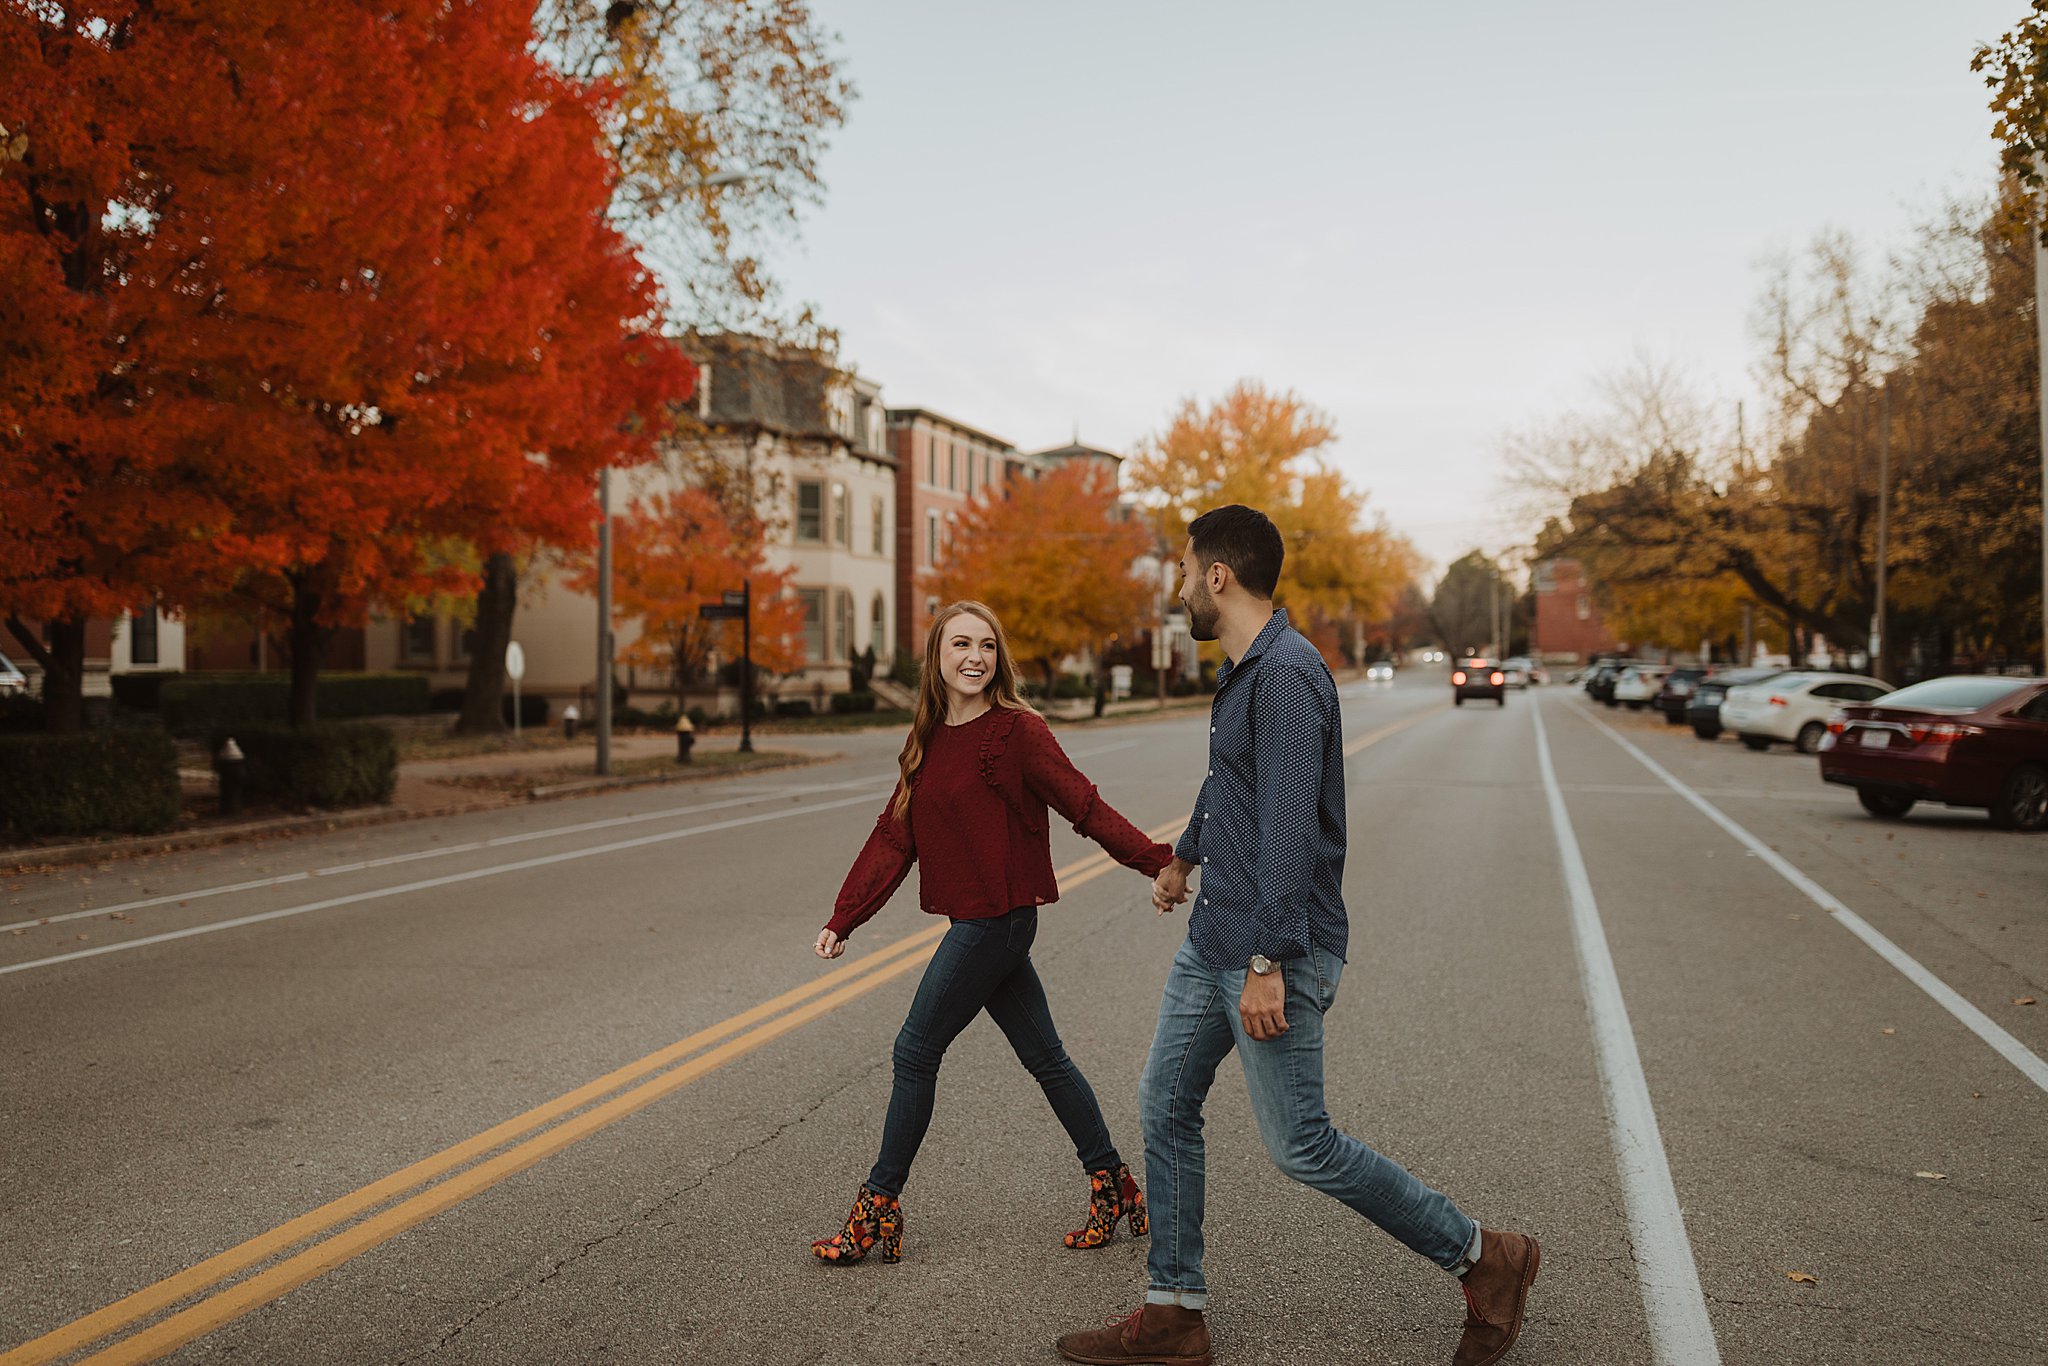 St. Louis Engagement Pictures in the Fall